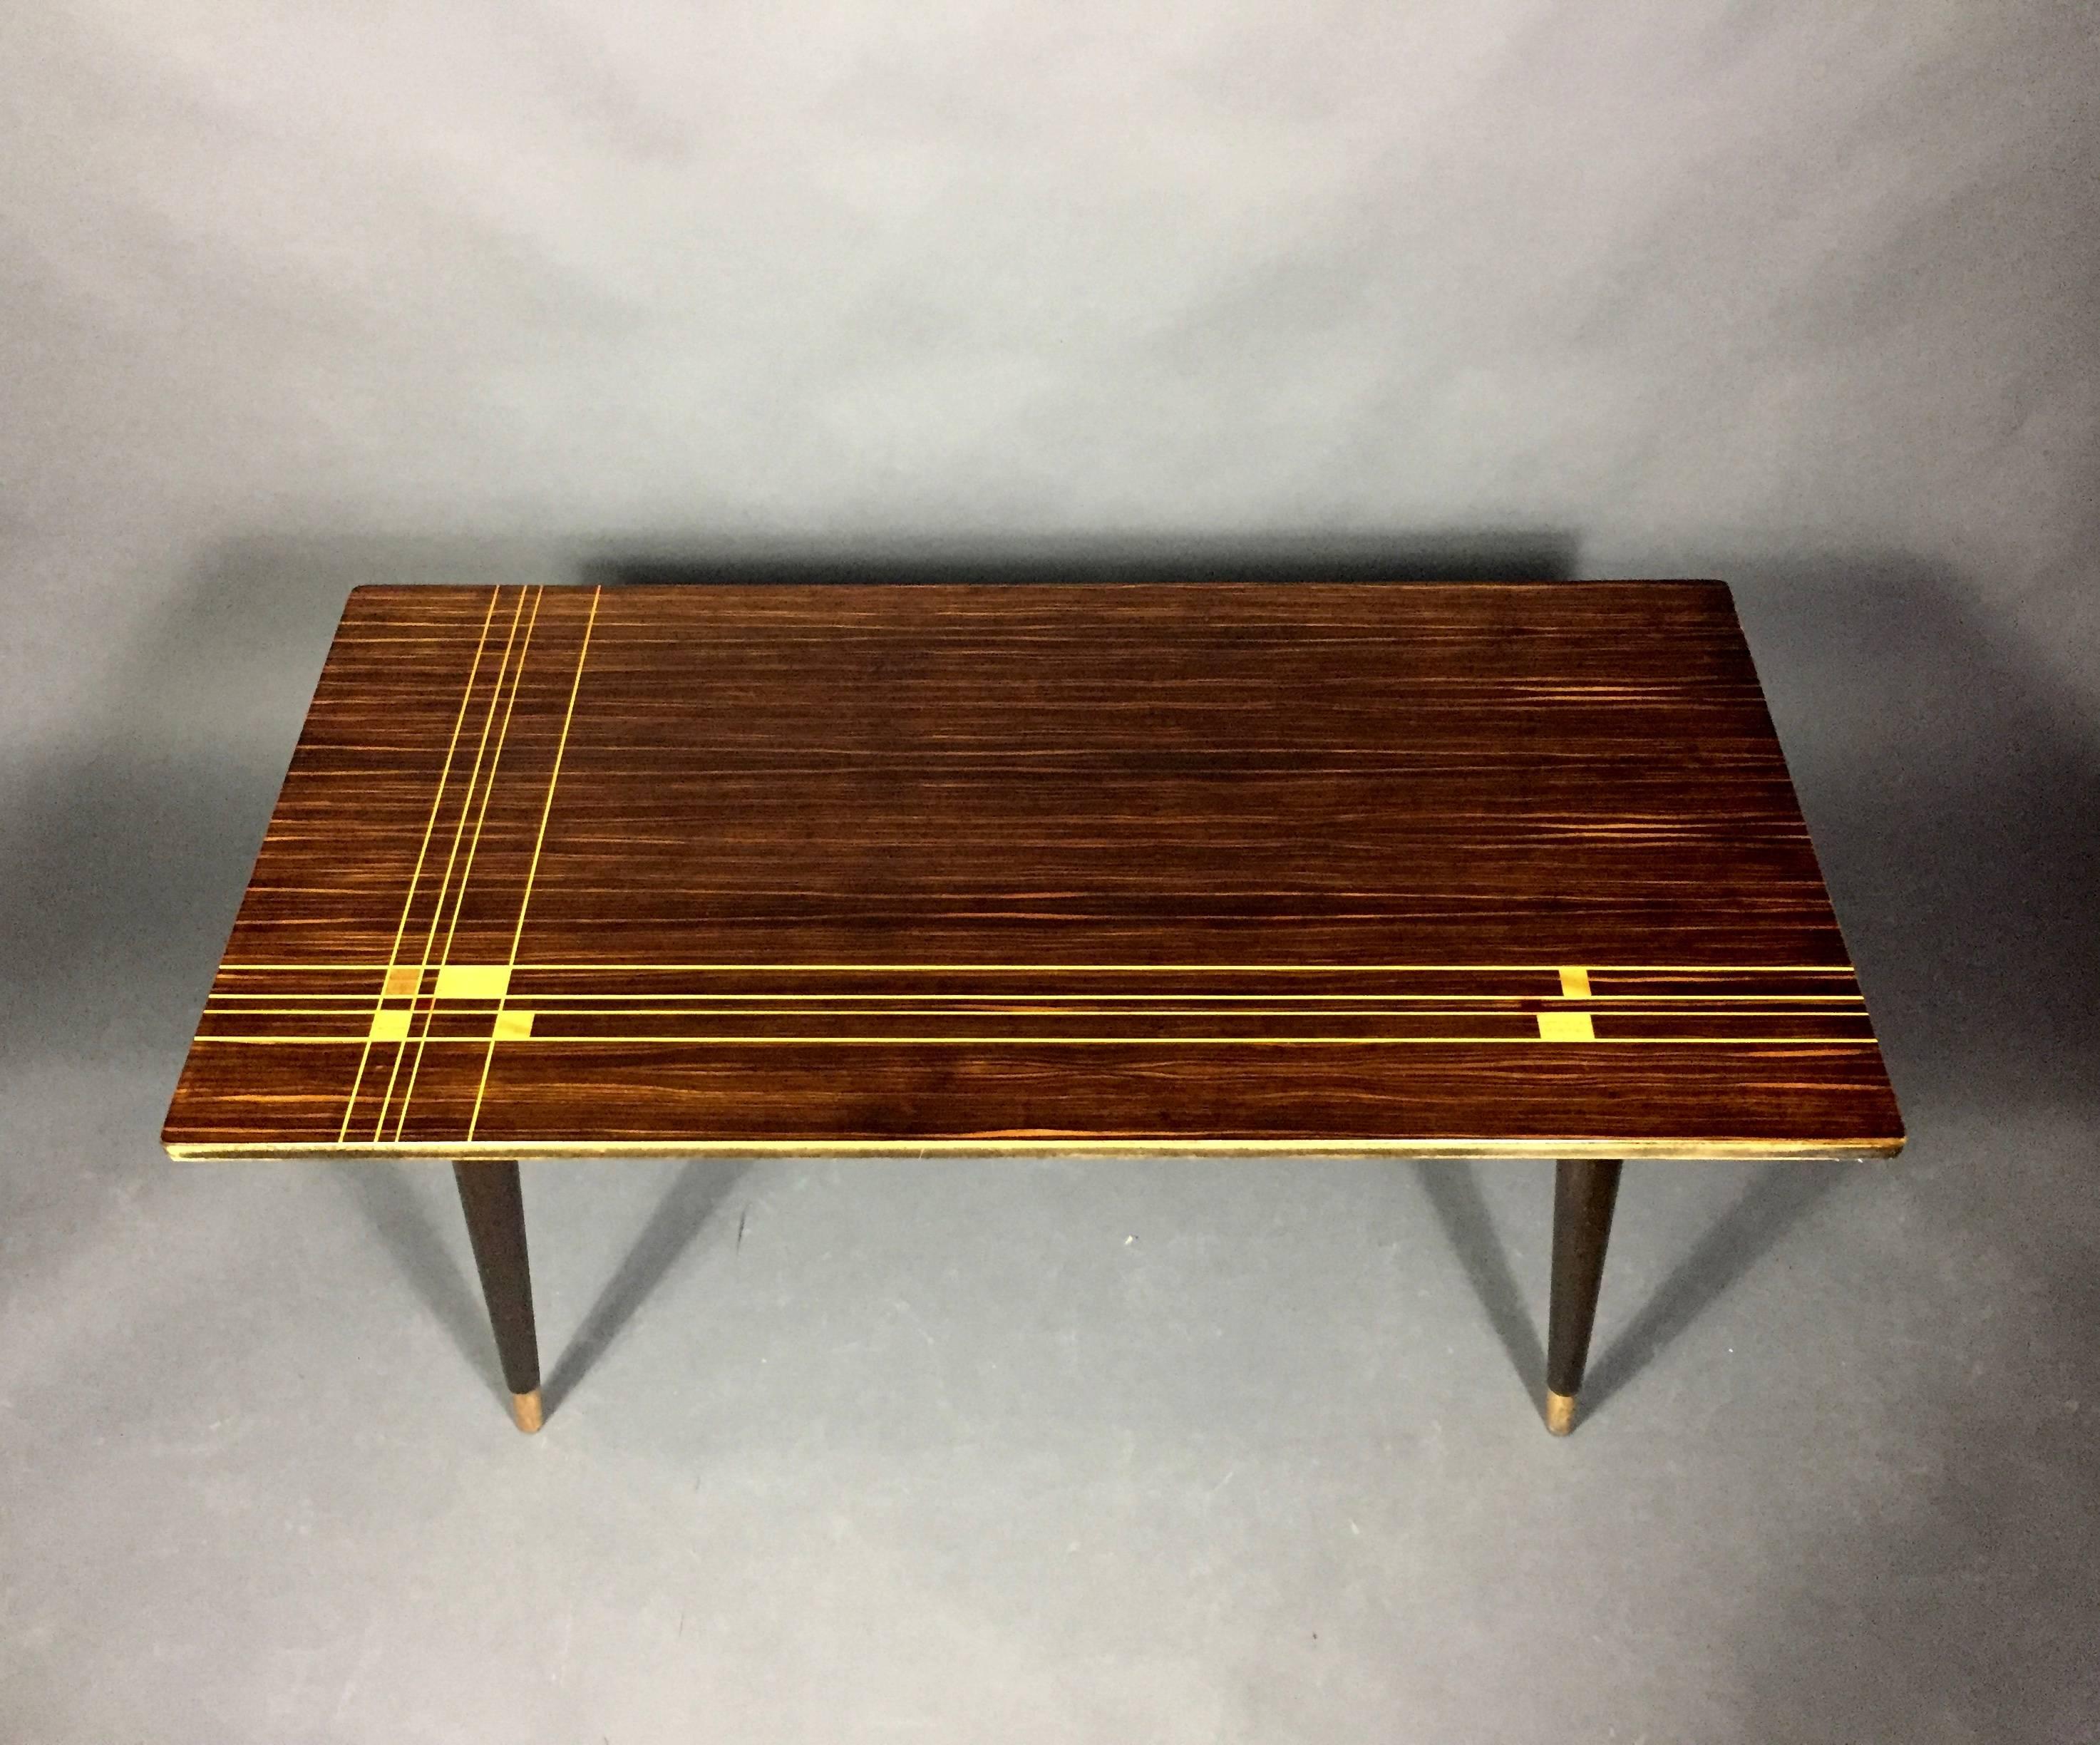 Created in the mid-1950s with a wonderful contrast top of Macassar ebony with inlaid wood in various stains in a geometric pattern. Angled legs terminate in original brass caps. Designed as 